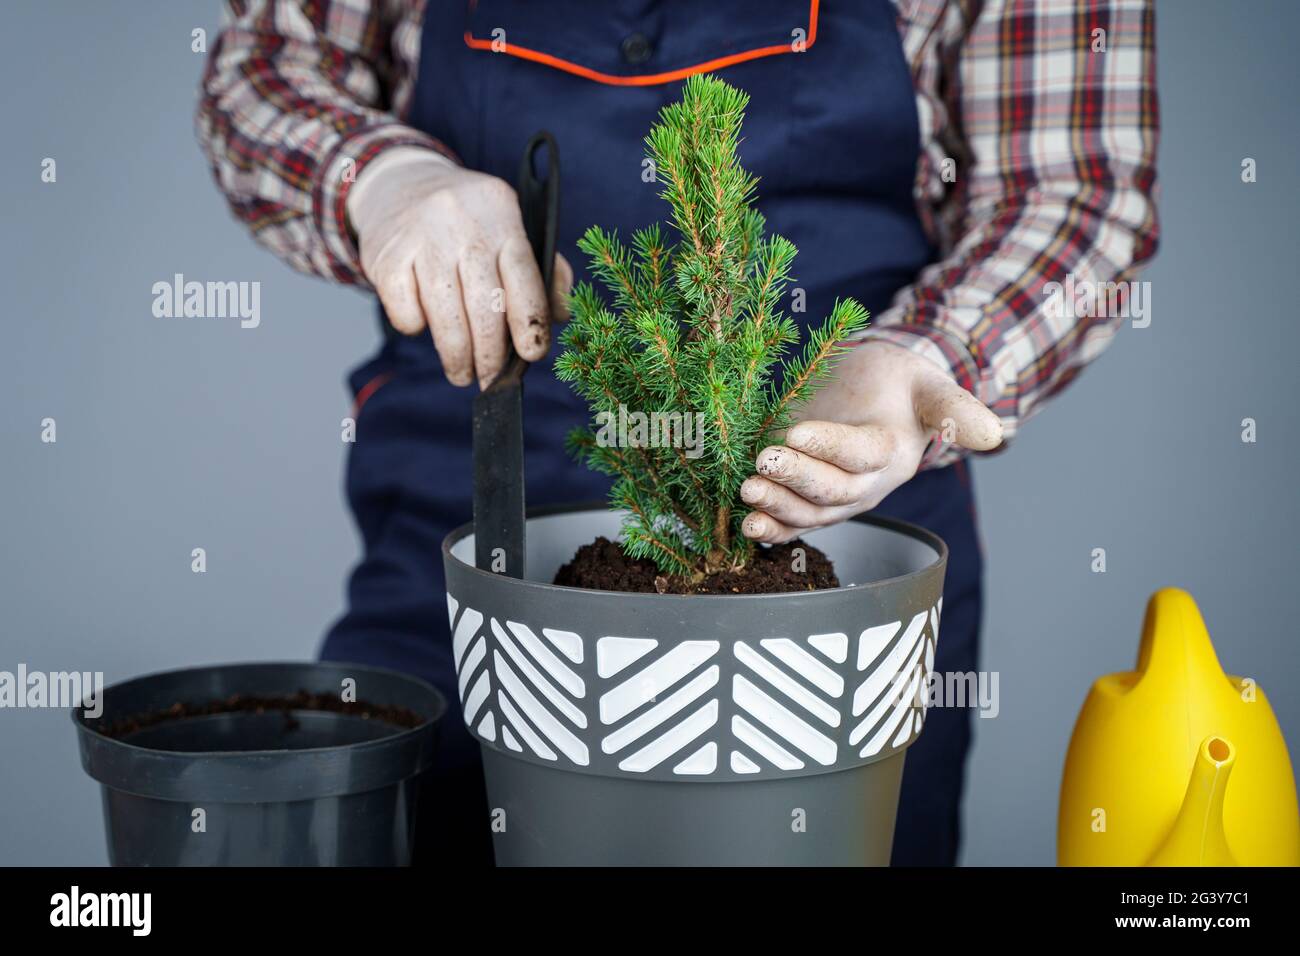 Hands close-up of male gardener in uniform and gloves transplants house plant of genus of coniferous evergreen trees into new po Stock Photo